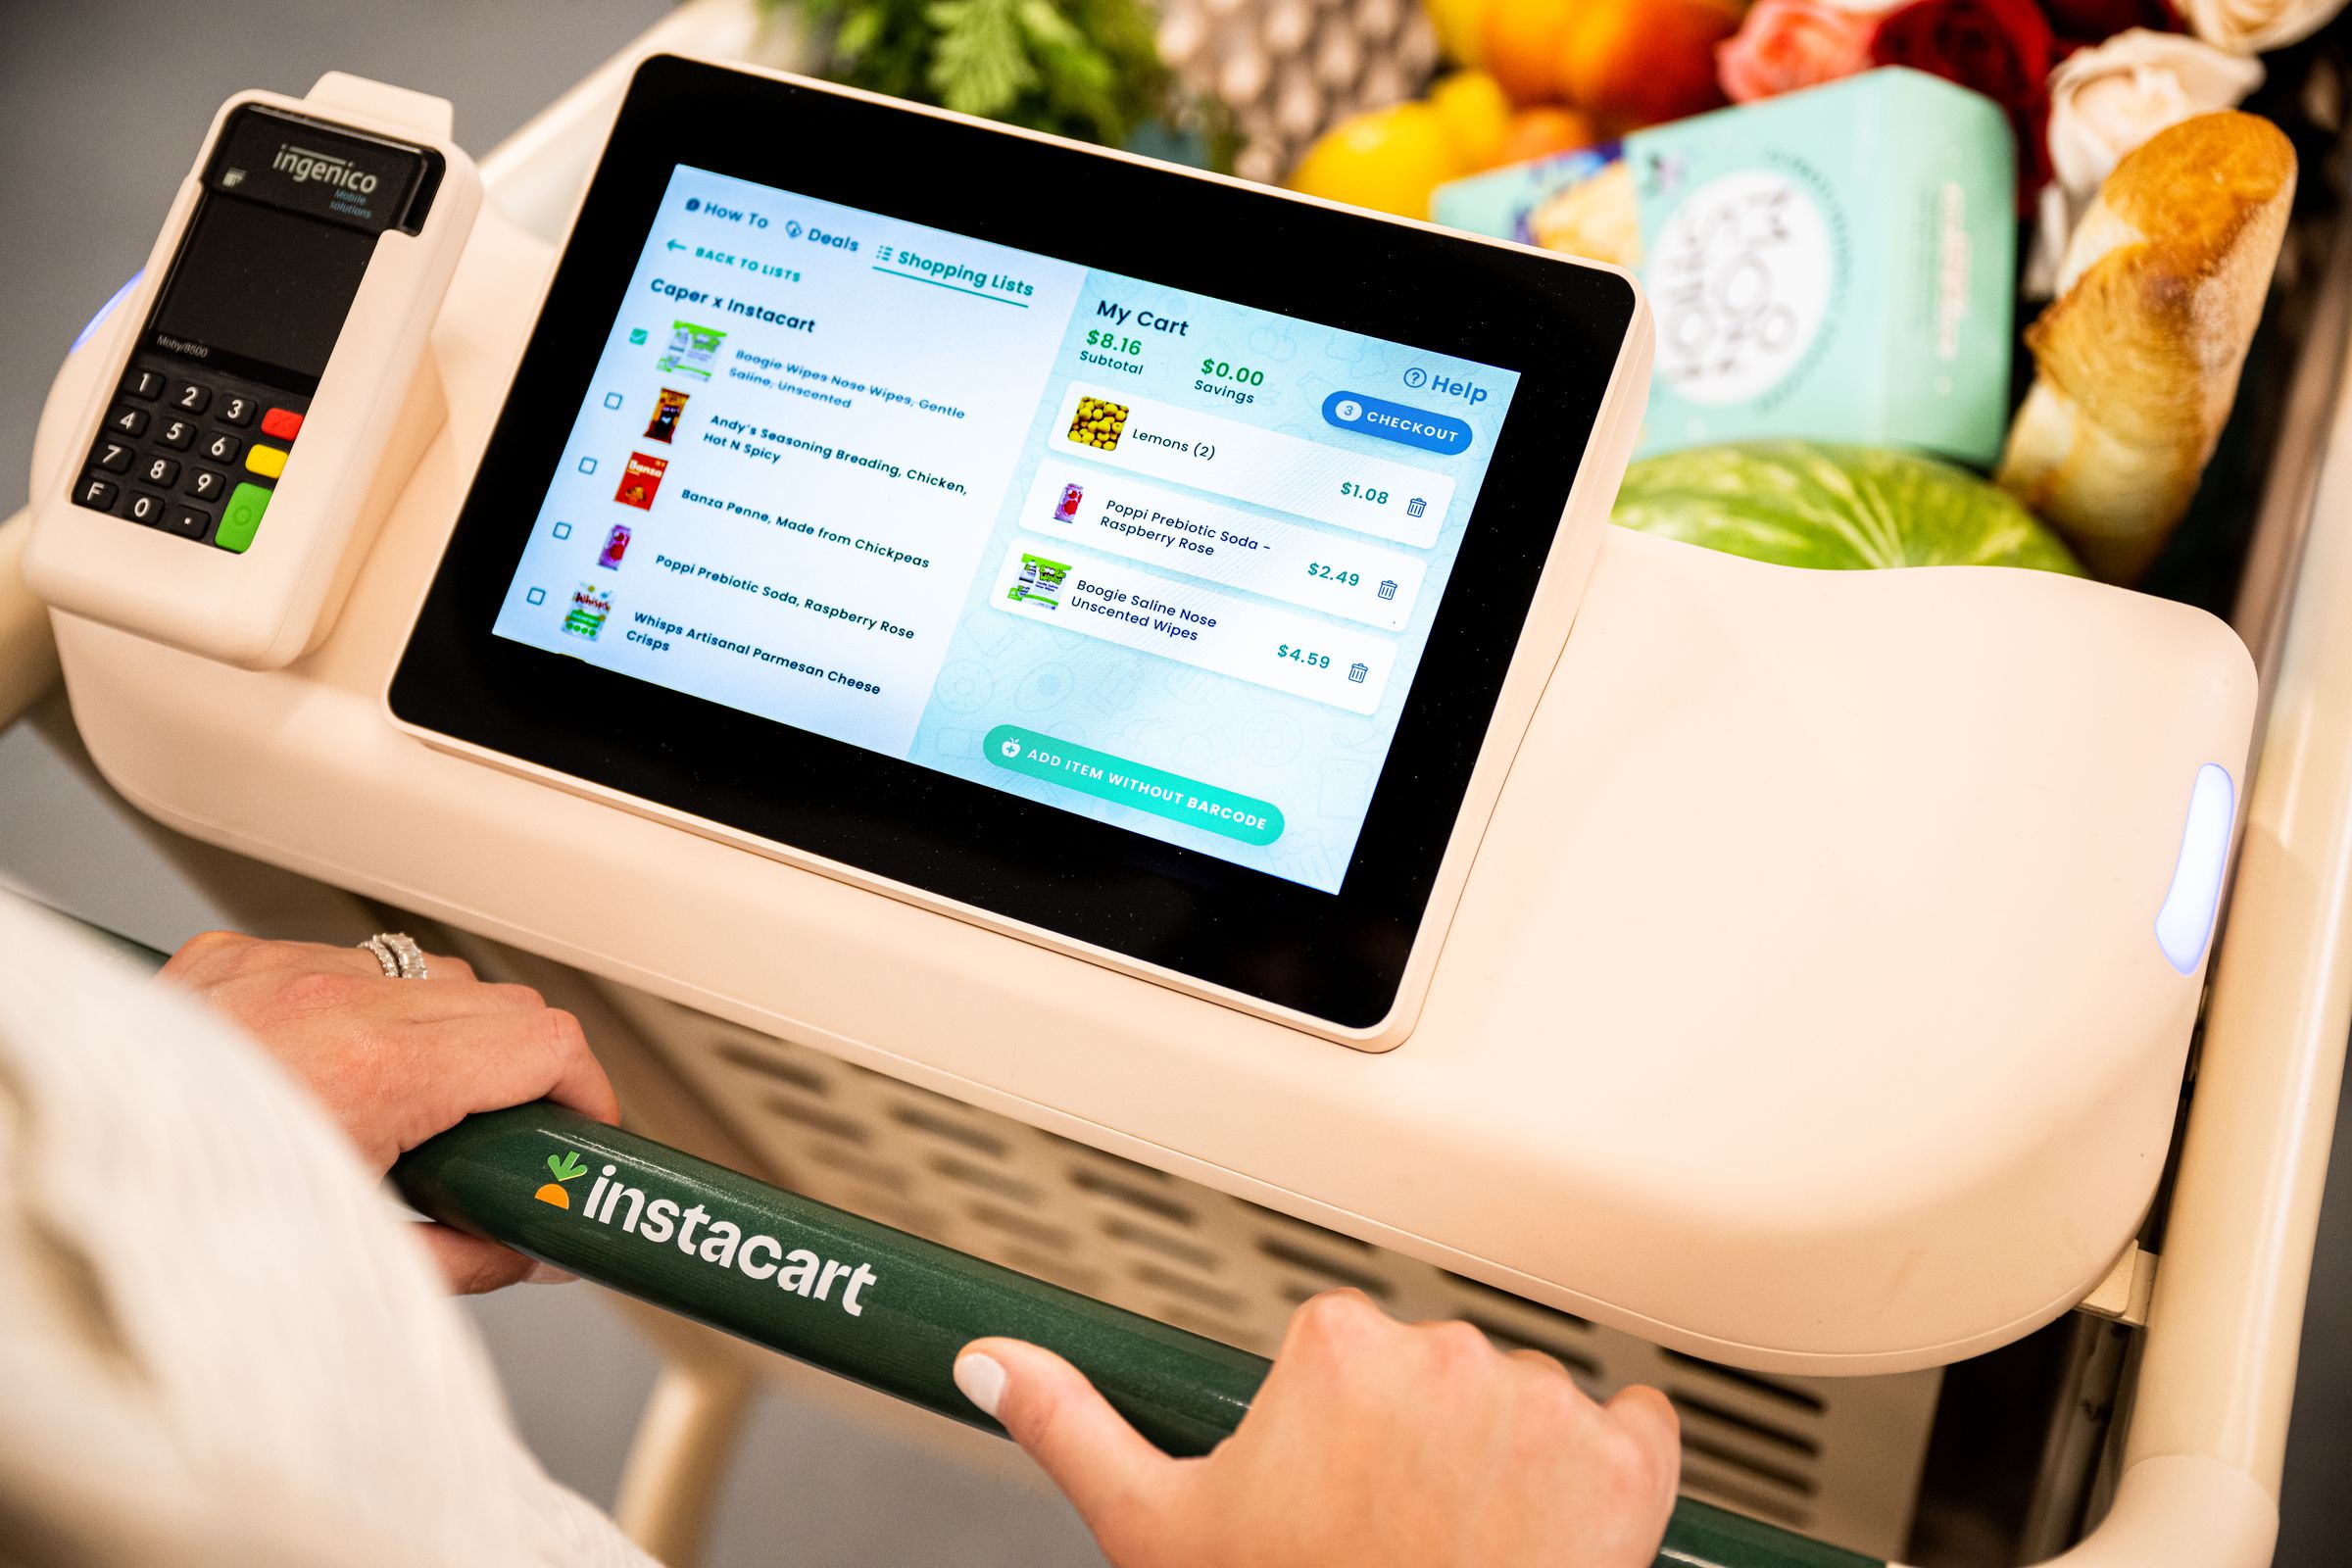 You scan the Caper Cart’s QR code in the Instacart app and it syncs your shopping lists. You can then pay right on the cart.